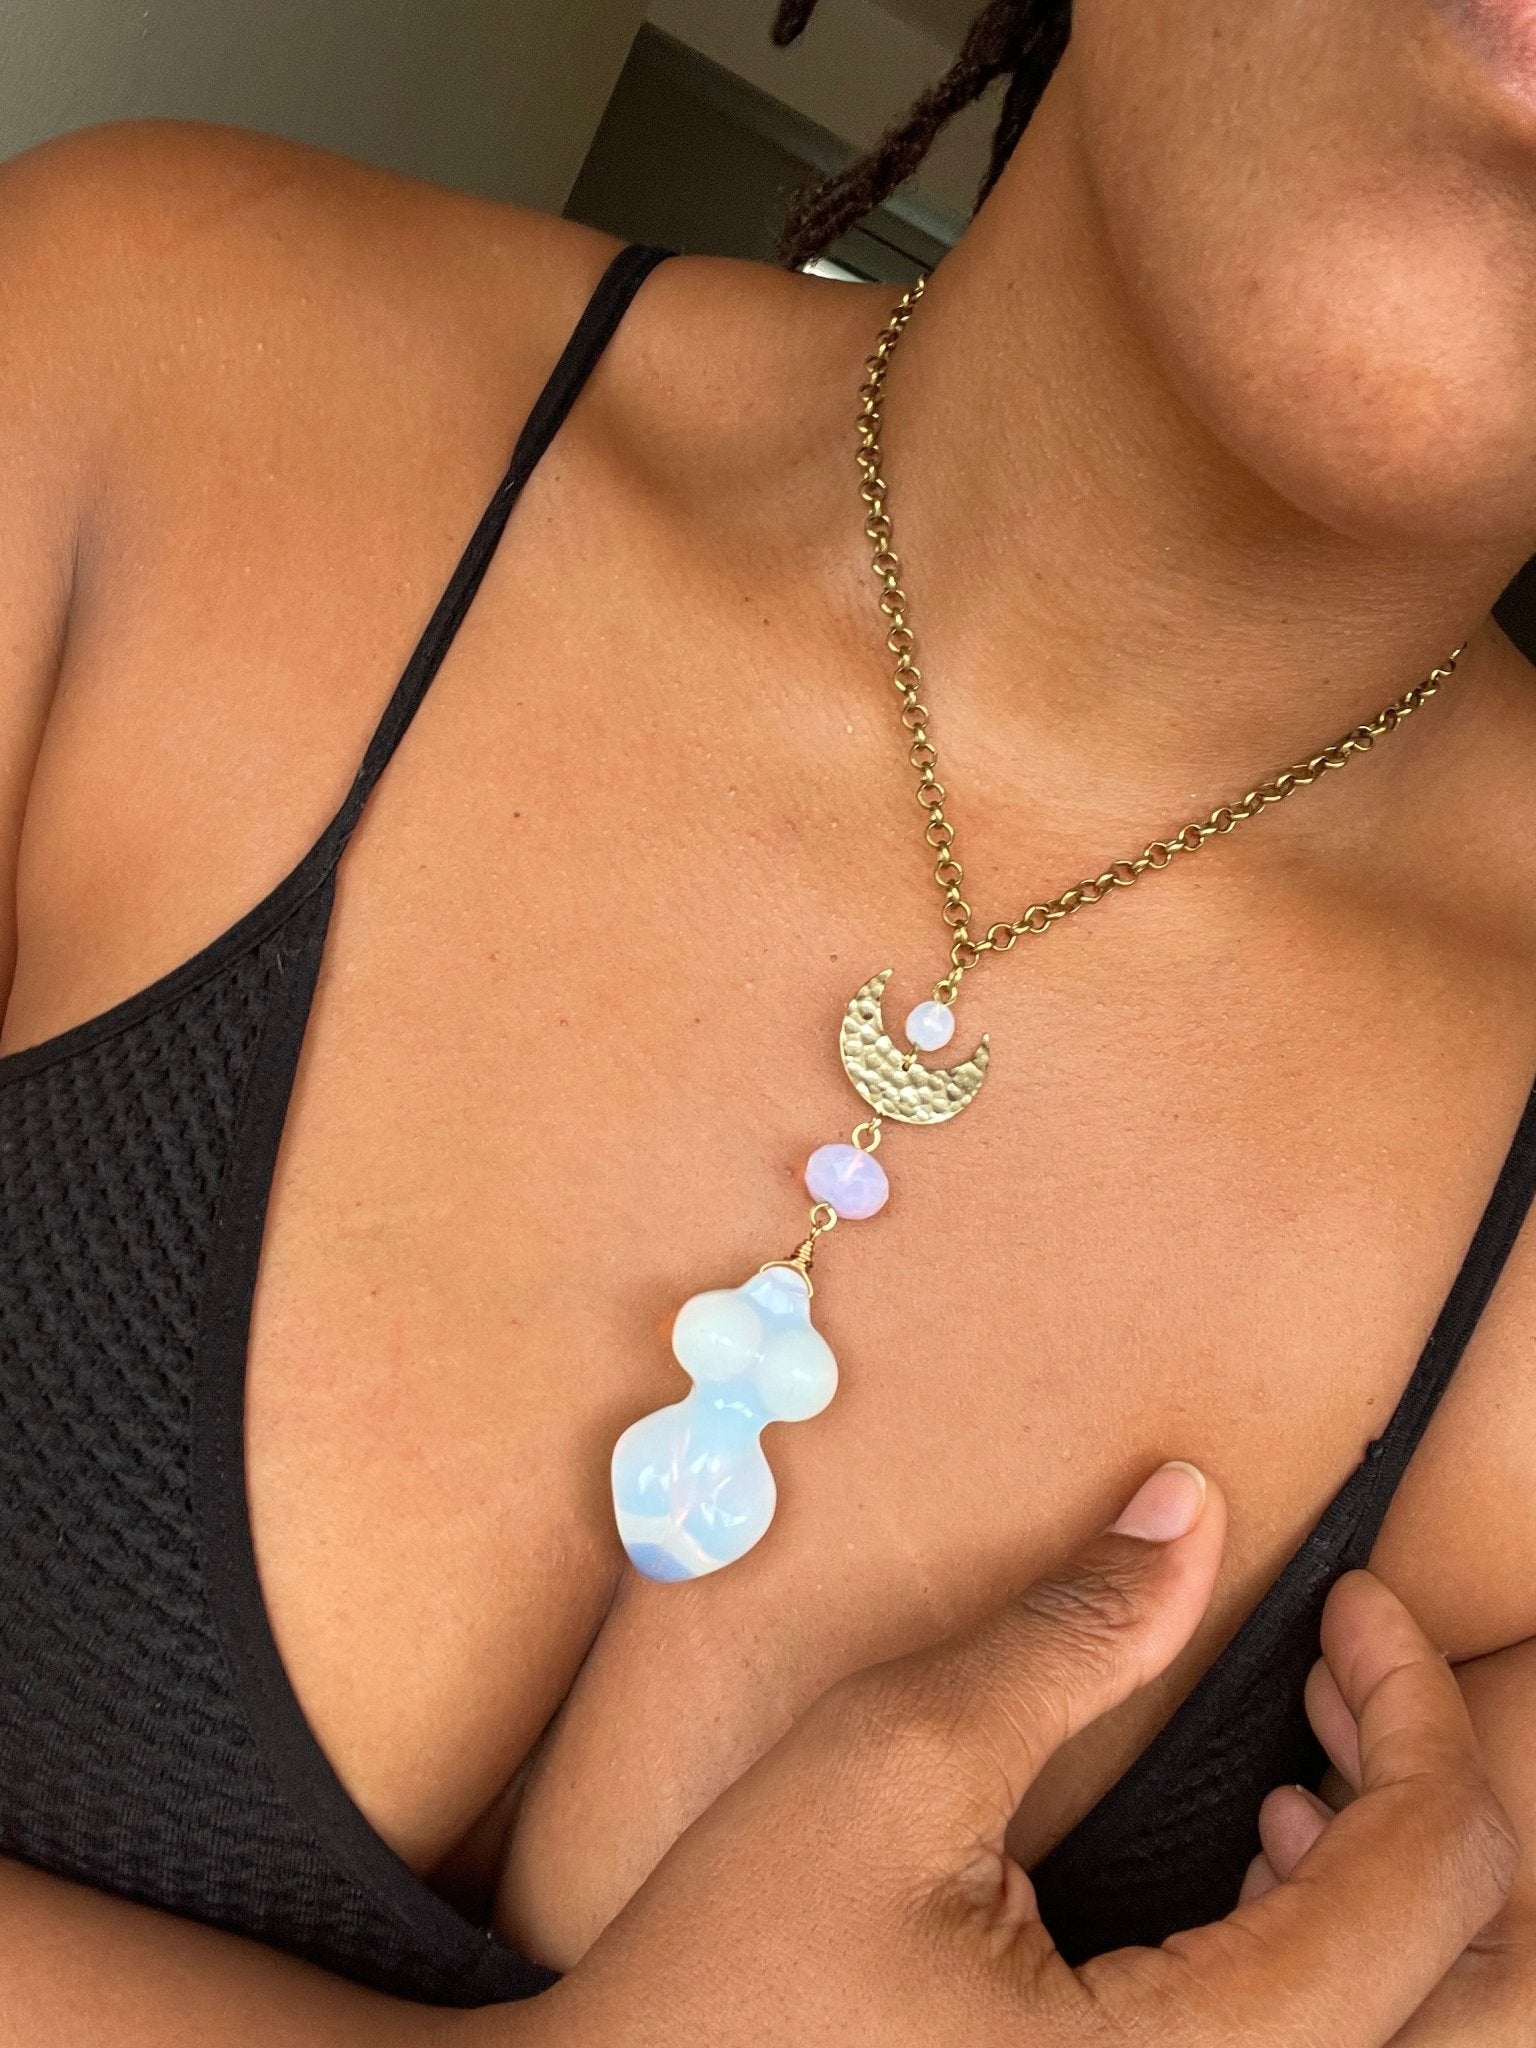 The Moon Goddess Opalite Necklace - We Love Brass